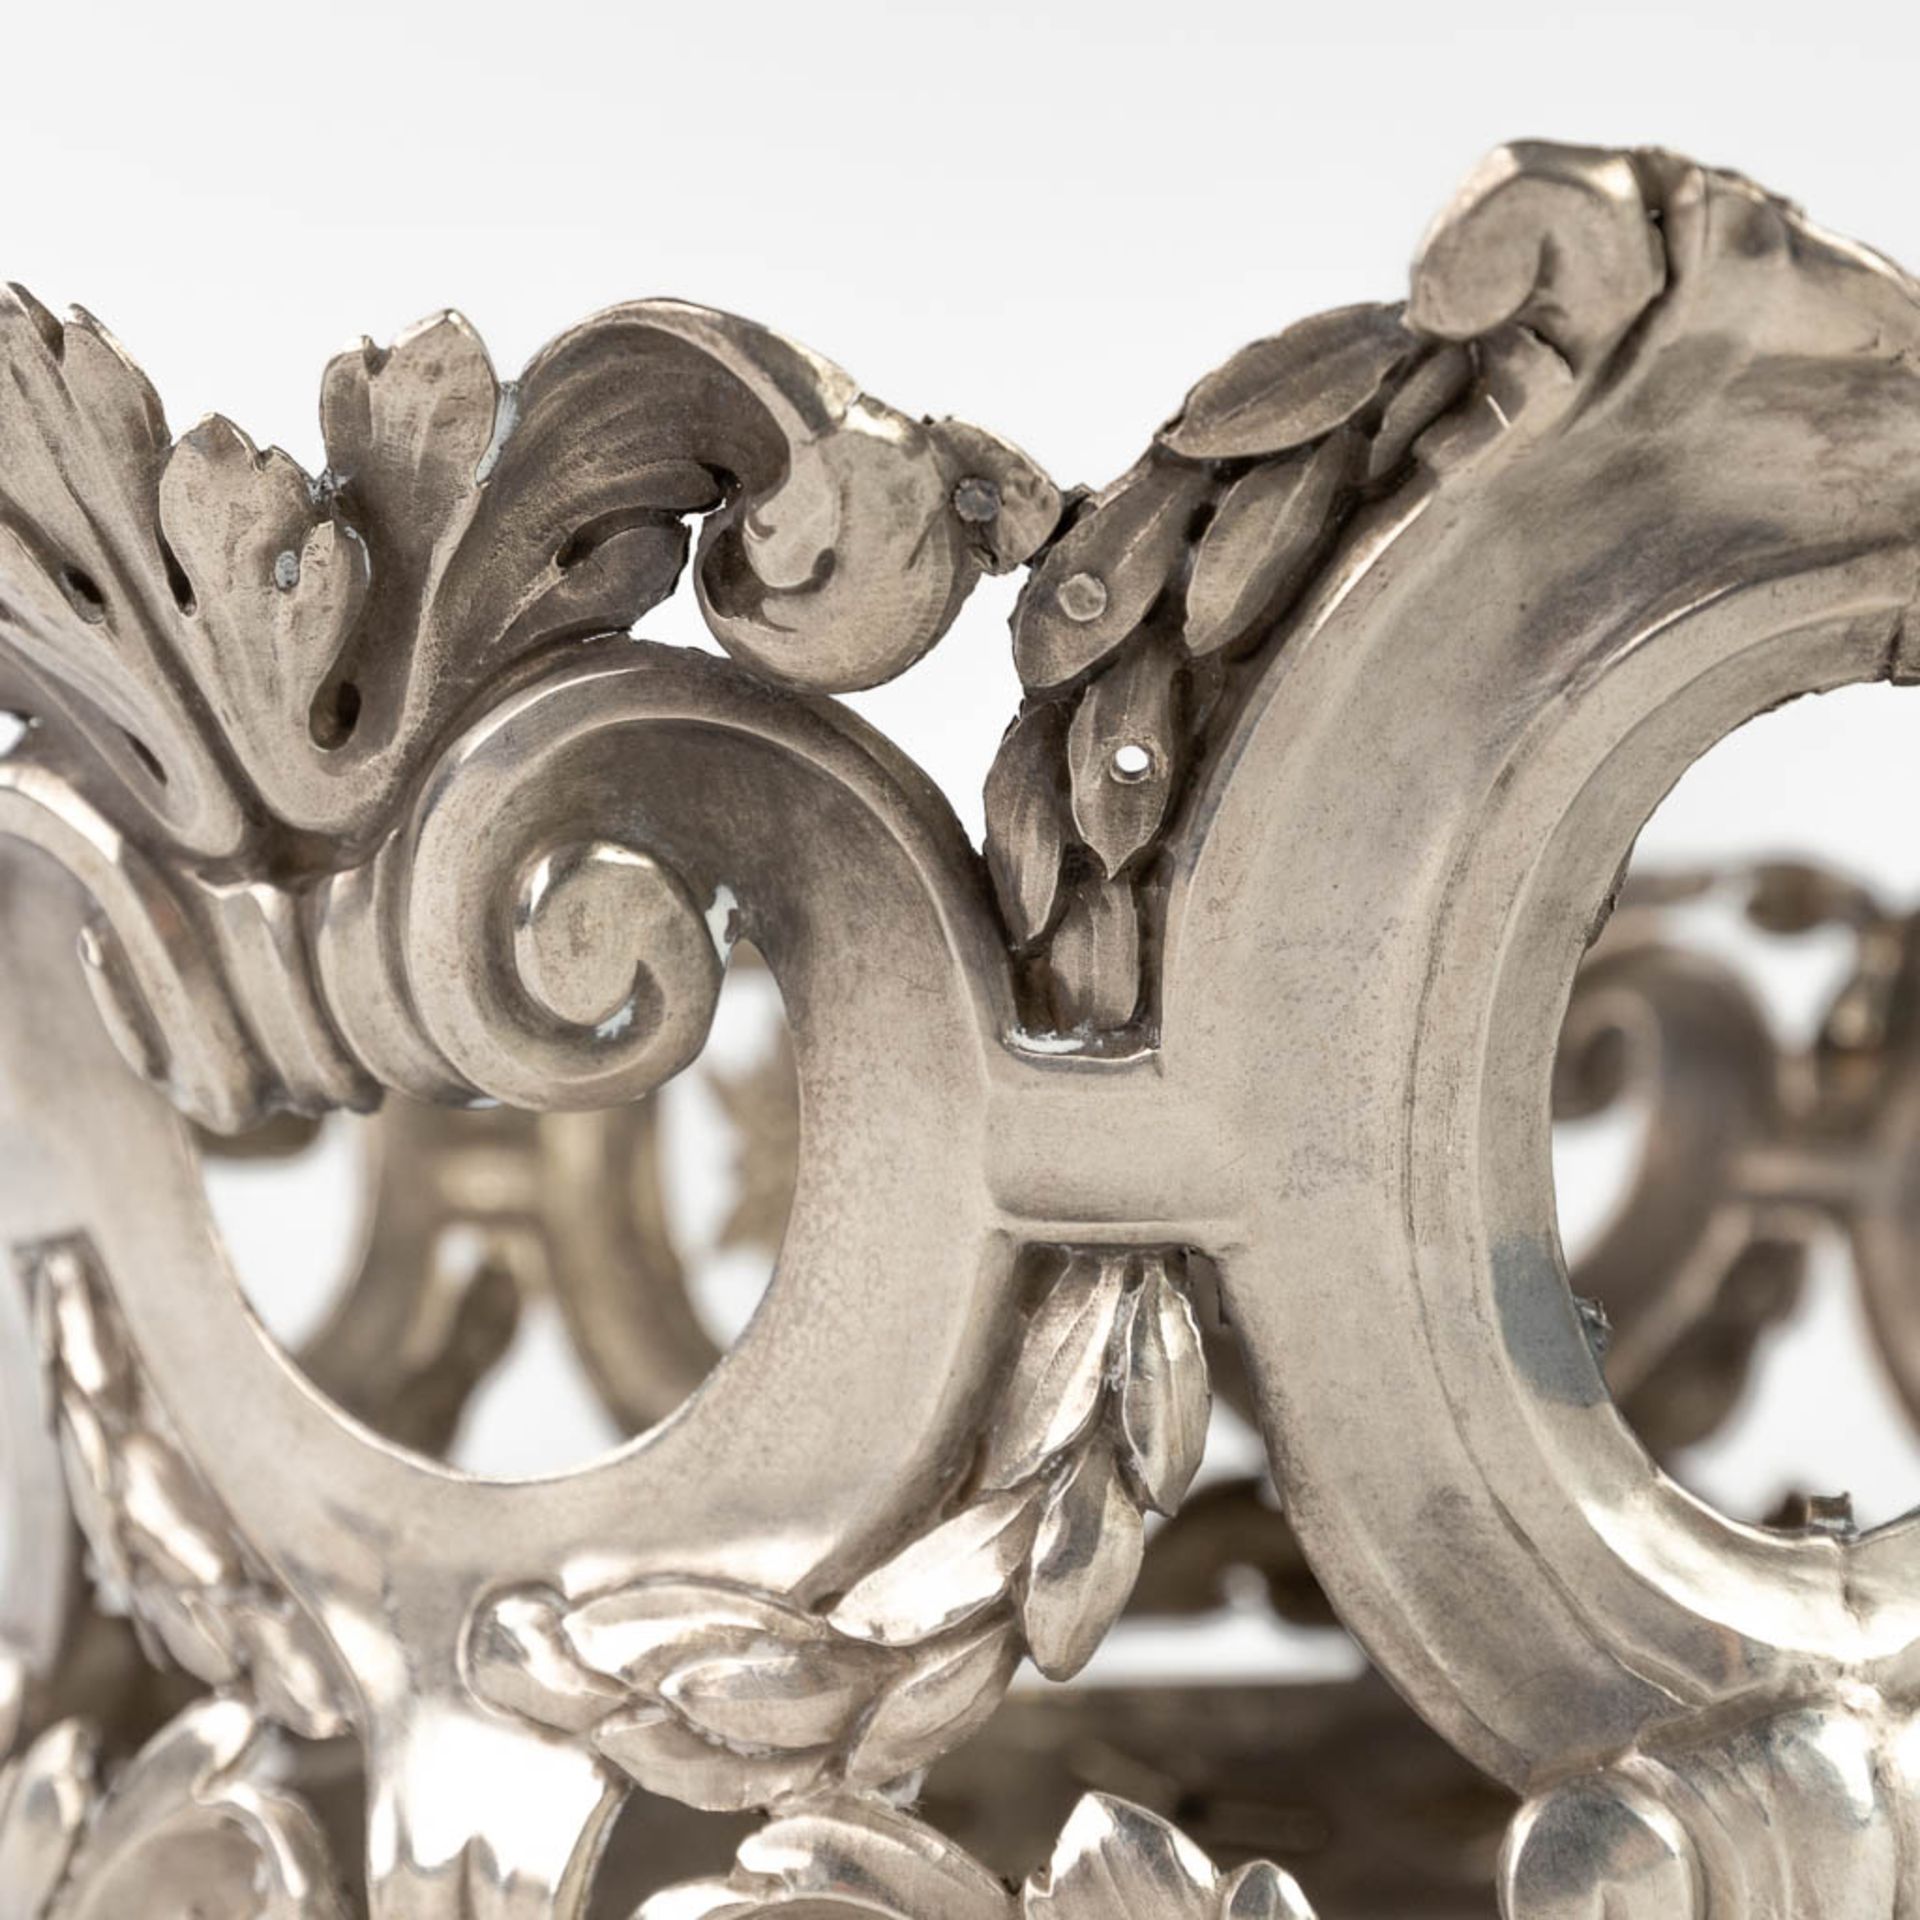 An exceptional crown, silver, Brussels, 1777, 18th C. 592g. (H: 26,5 x D: 11,5 cm) - Image 16 of 21